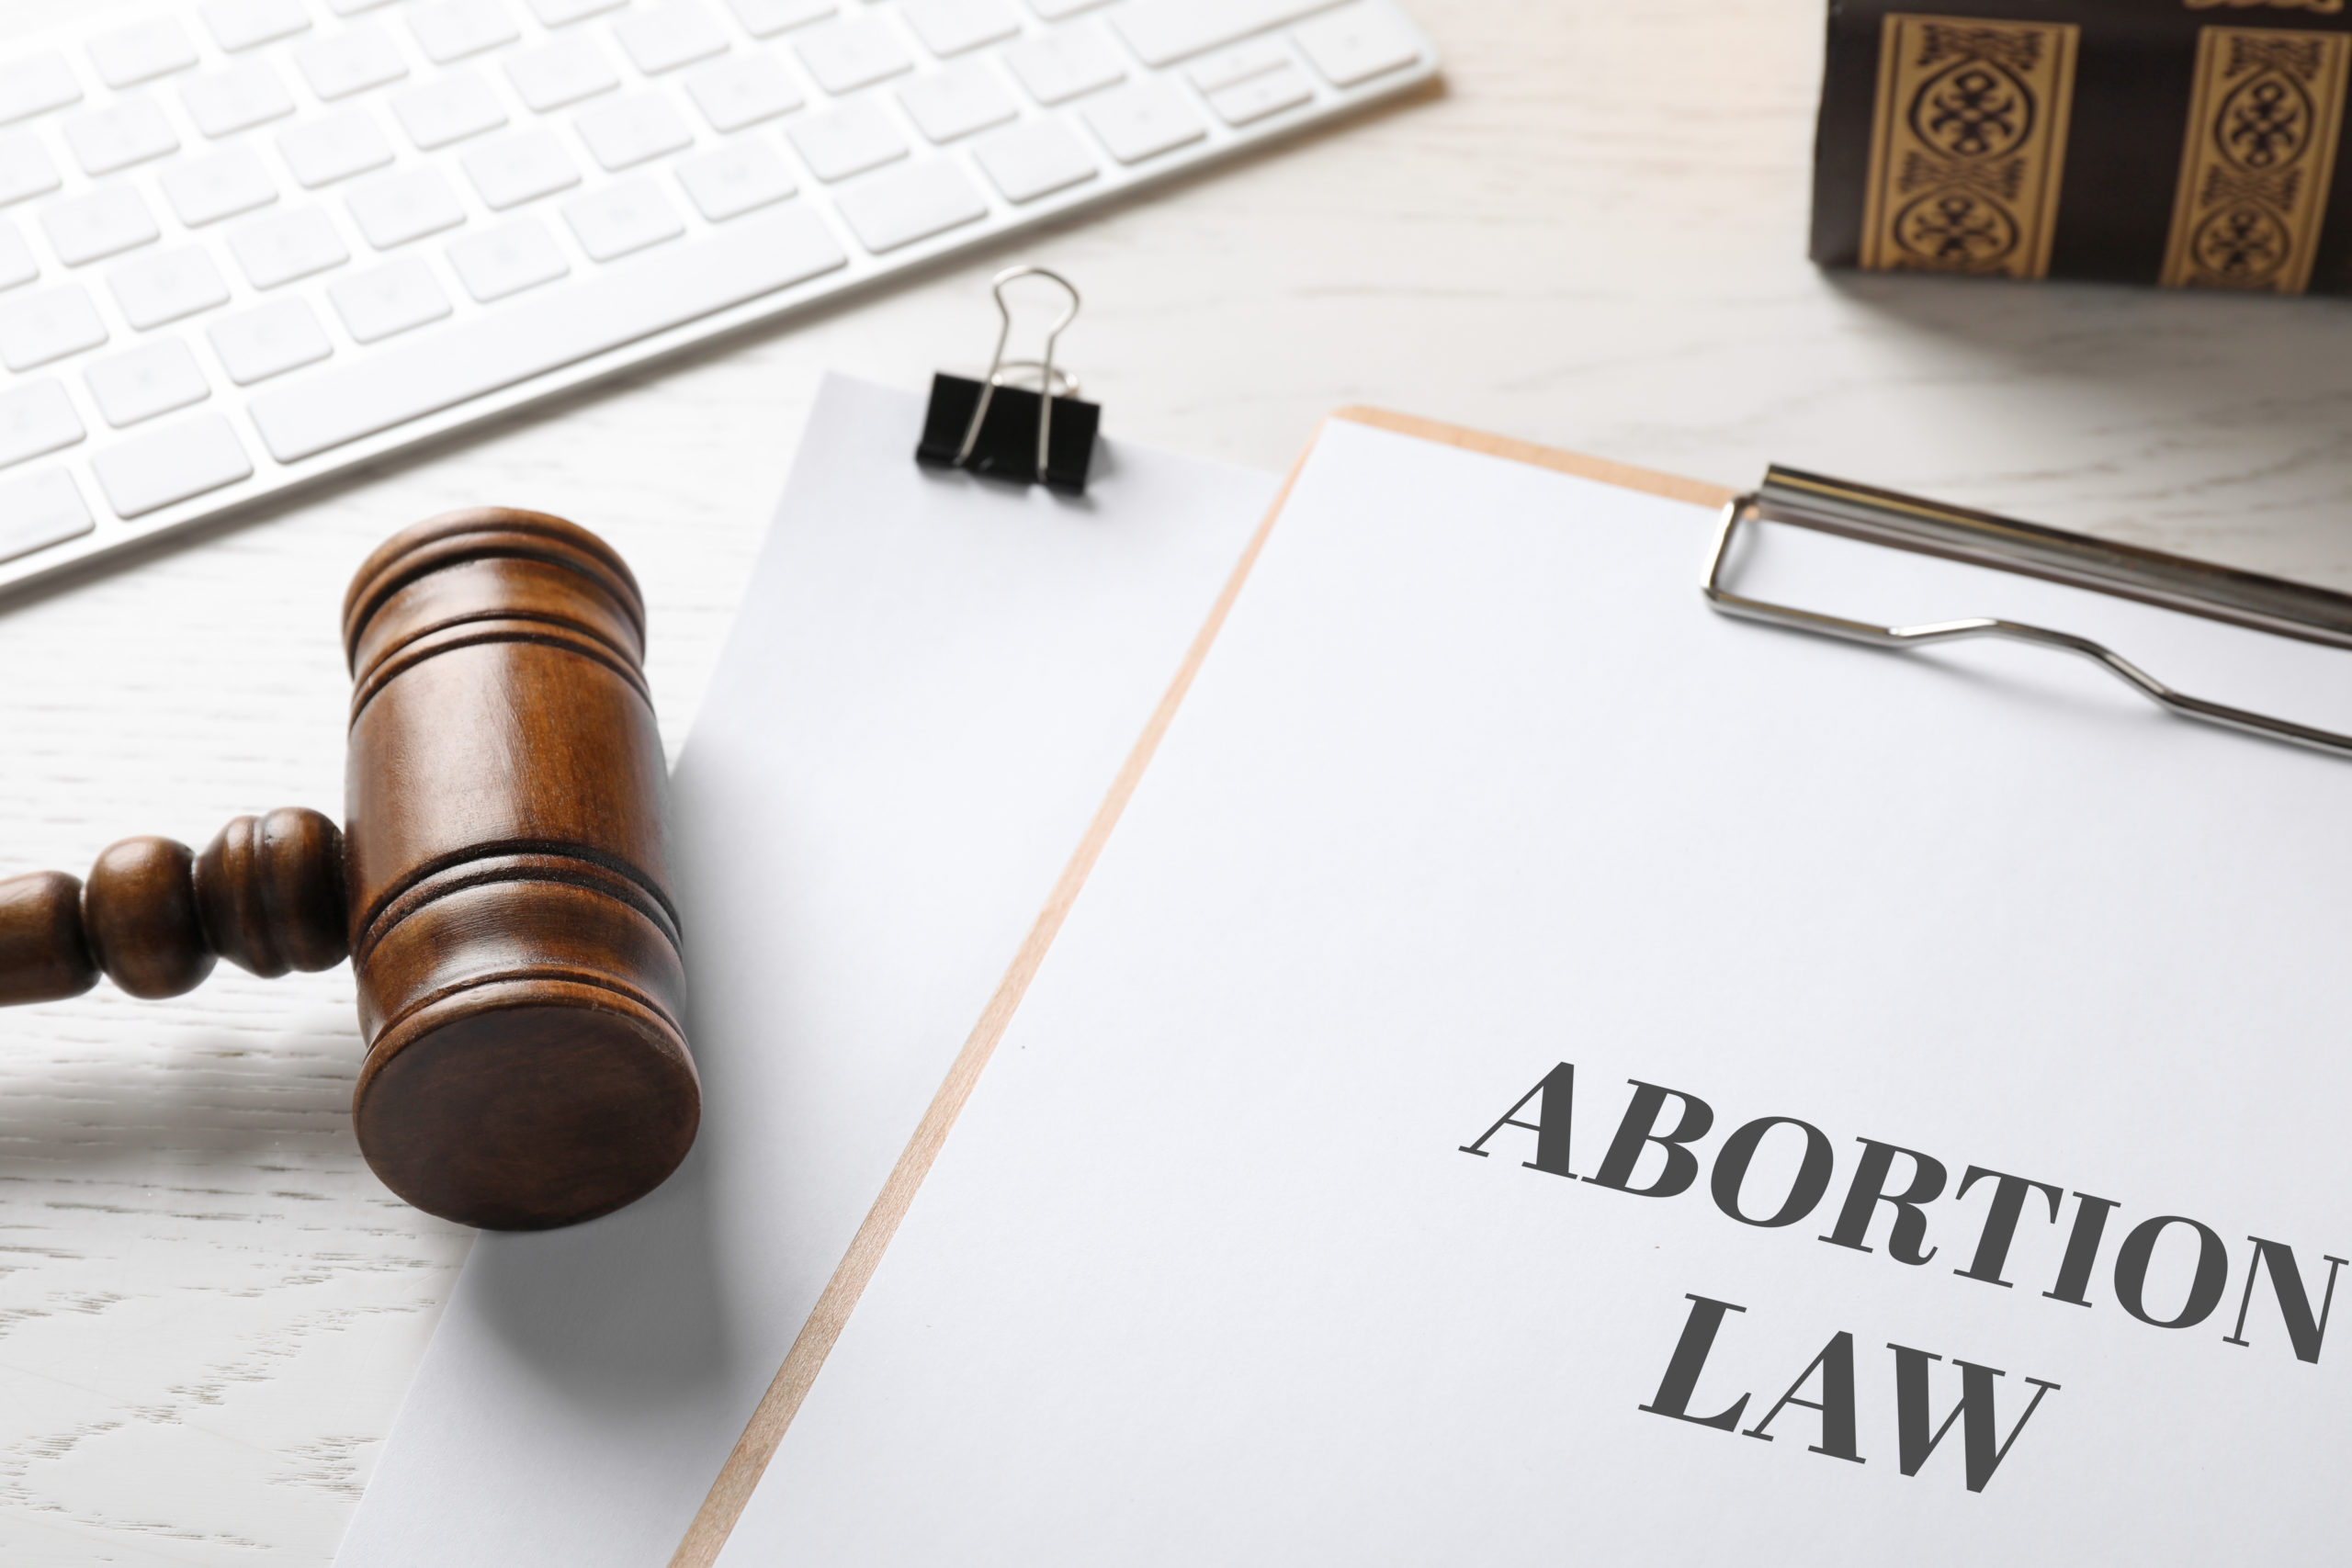 WHAT IS THE STATUS OF INDIANA’S 2022 ABORTION LAW IN LIGHT OF THE RULING BY THE INDIANA SUPREME COURT IN MEMBERS OF THE MED. LICENSING BD. OF IND. V. PLANNED PARENTHOOD OF GREAT NORTHWEST, DECIDED ON JUNE 30, 2023?